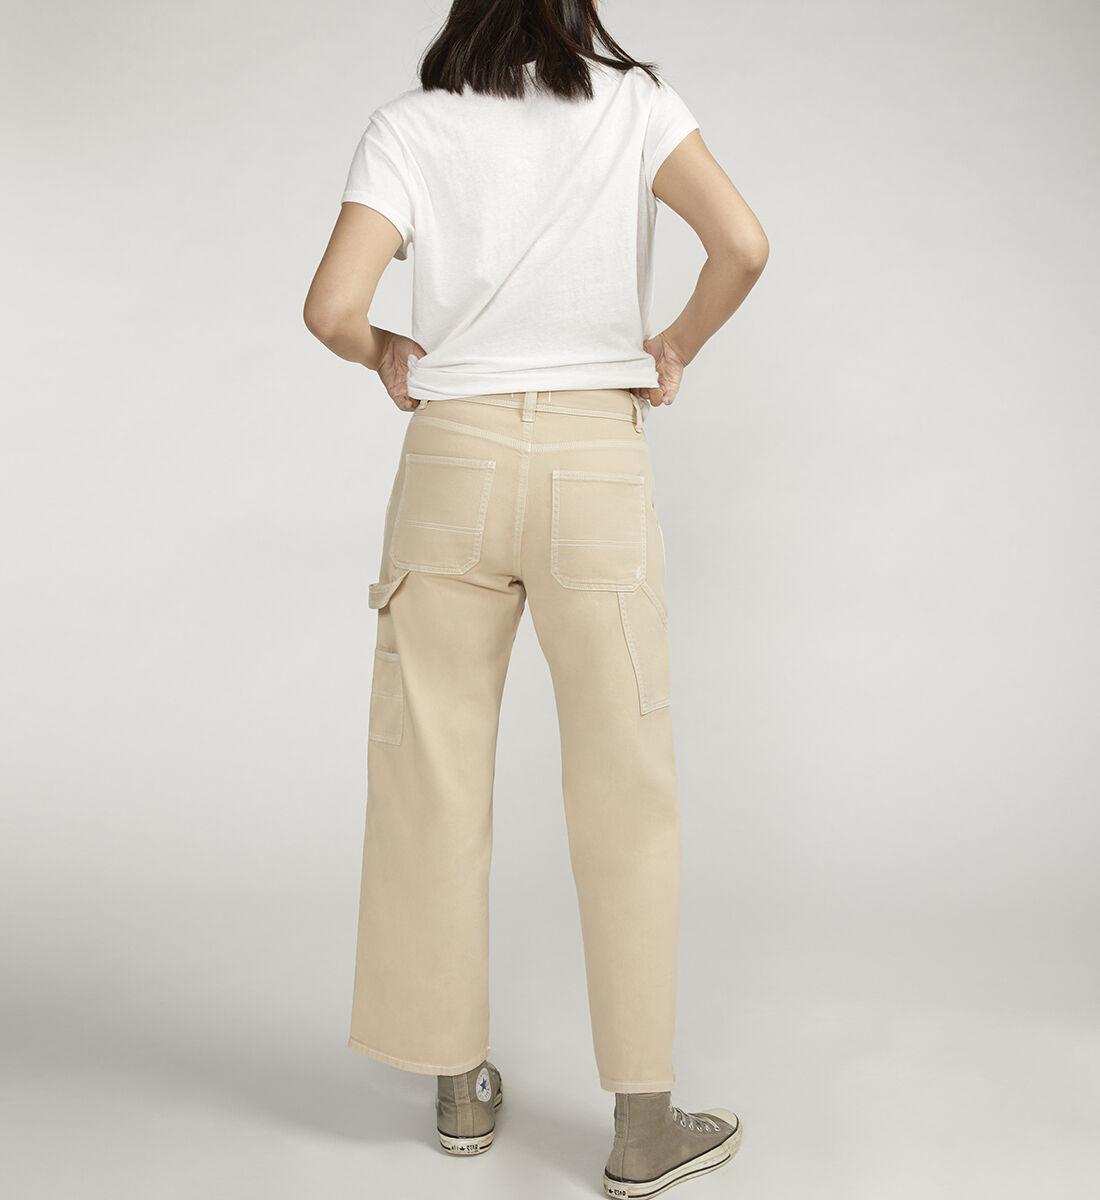 Buy Relaxed Fit Straight Leg Carpenter Pant for USD 46.80 | Silver 